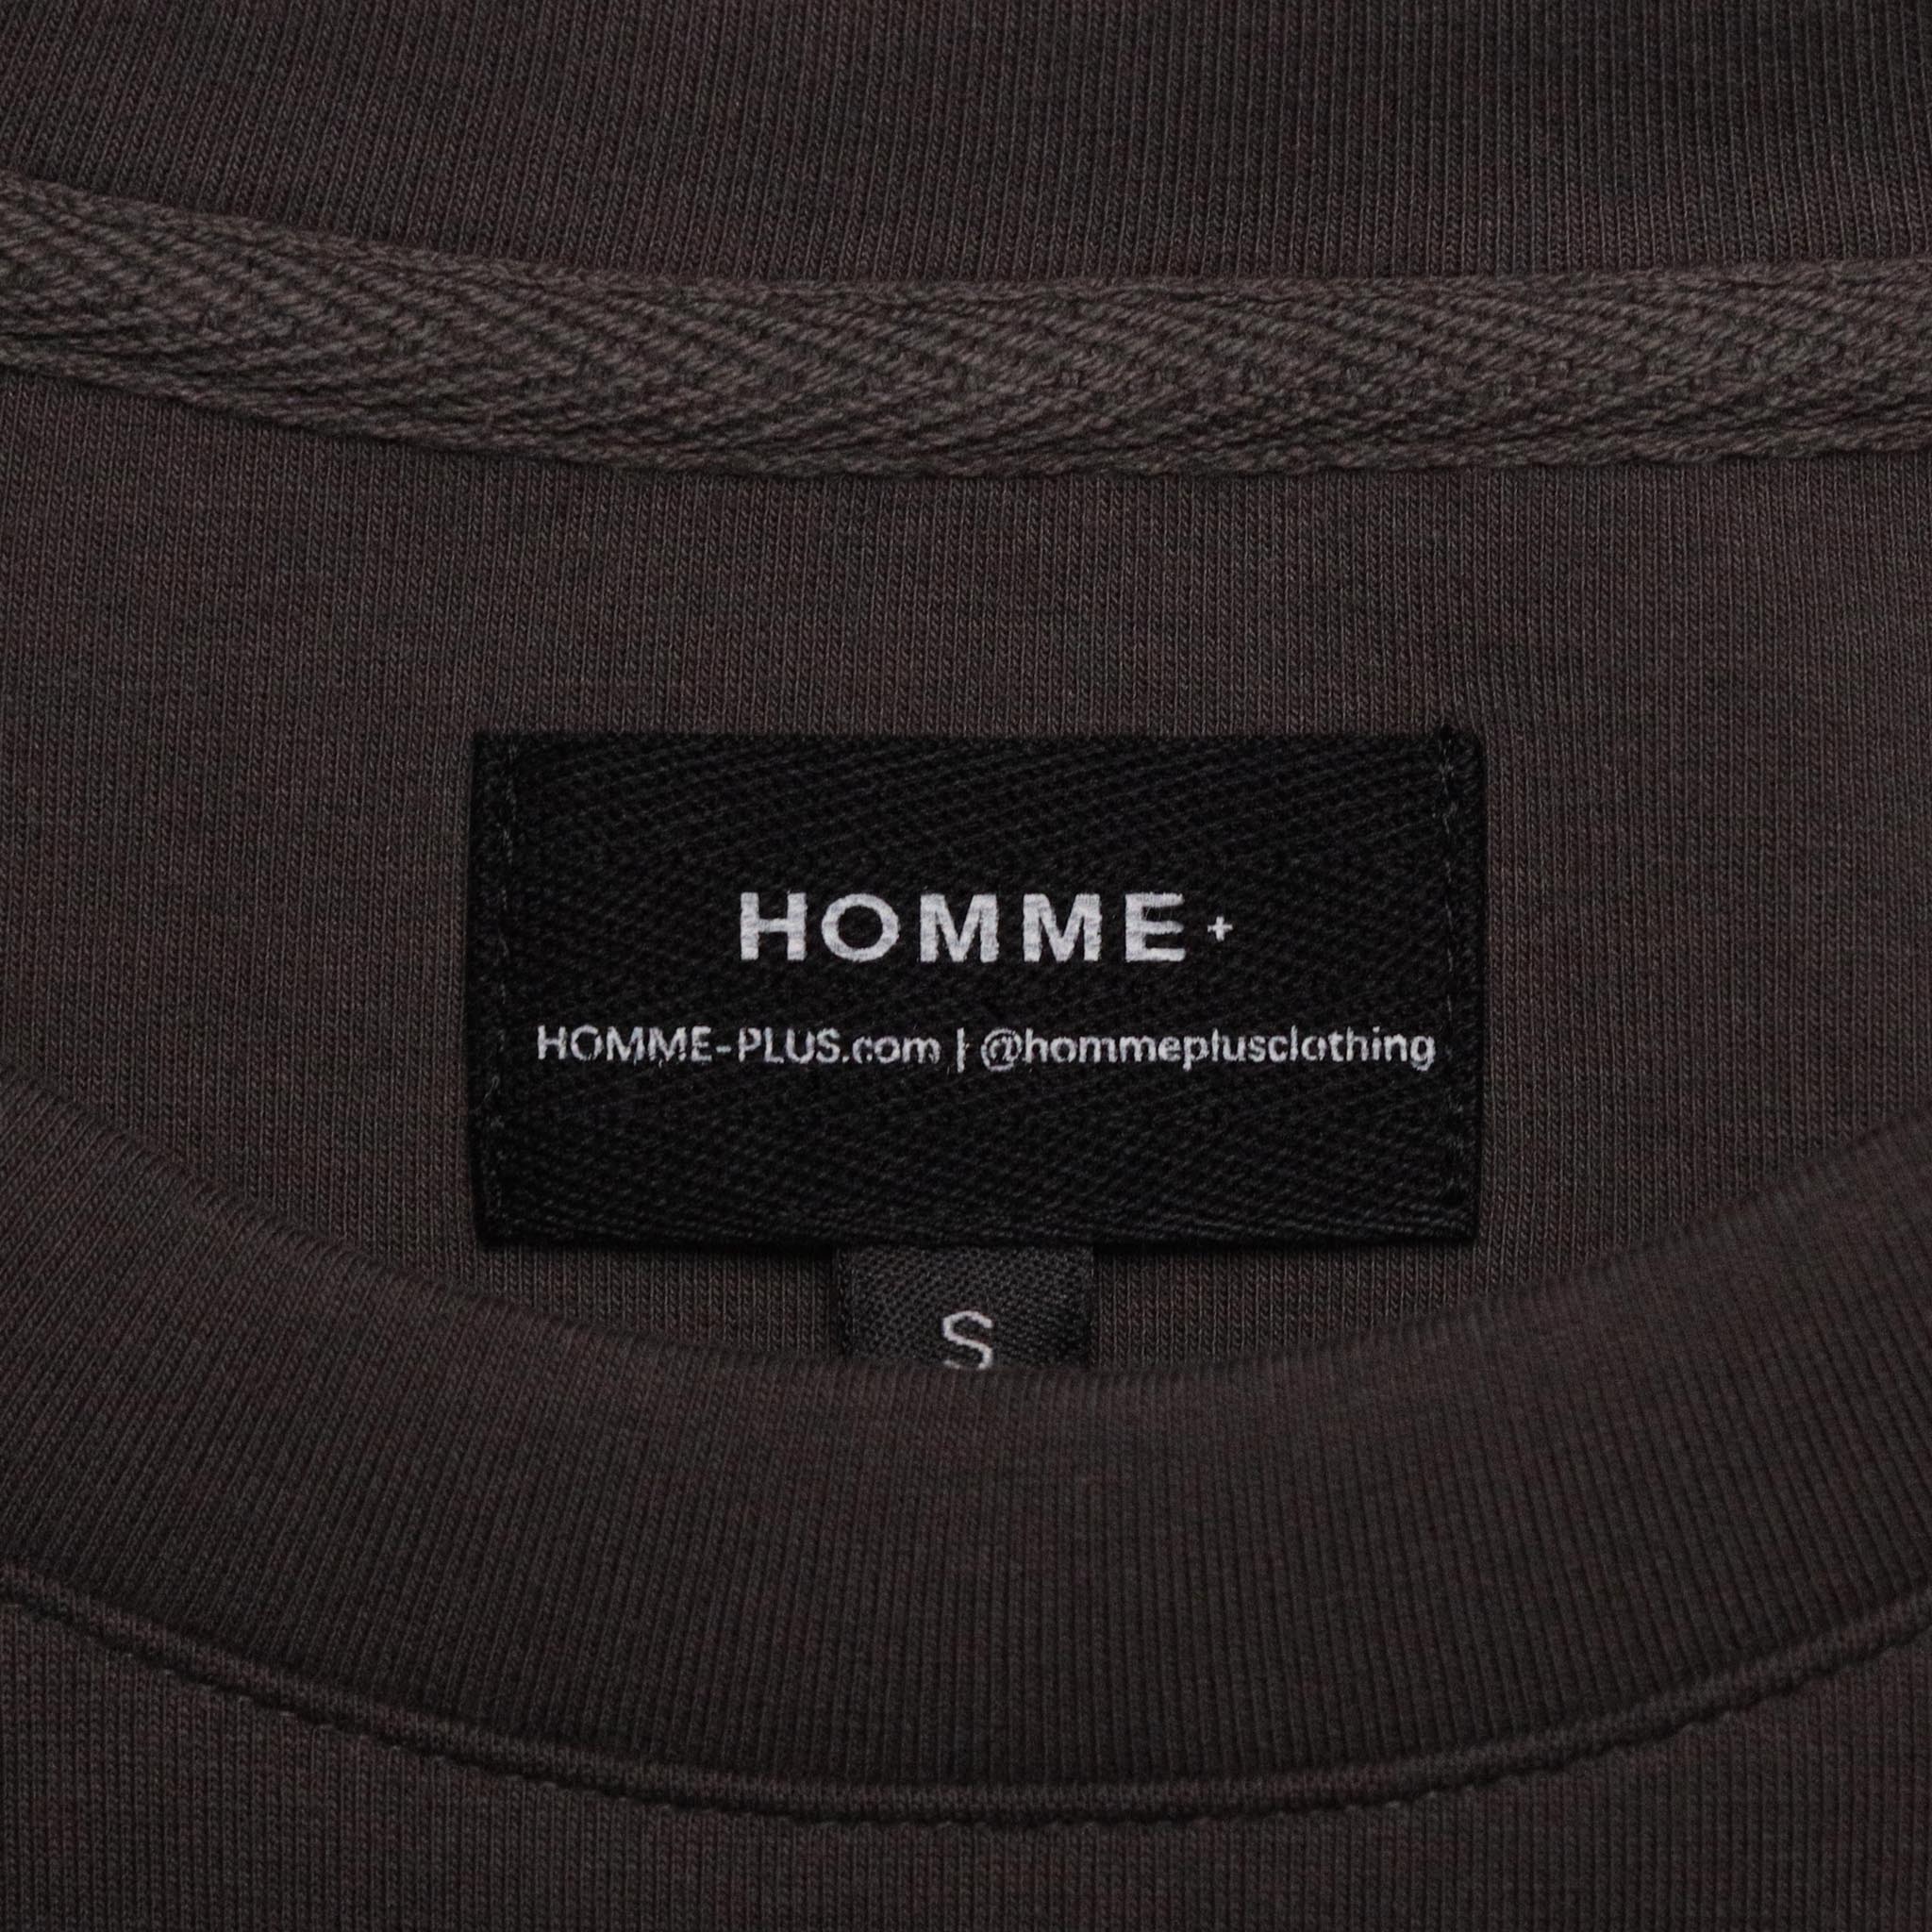 HOMME+ Old English Script L/S Tee Charcoal